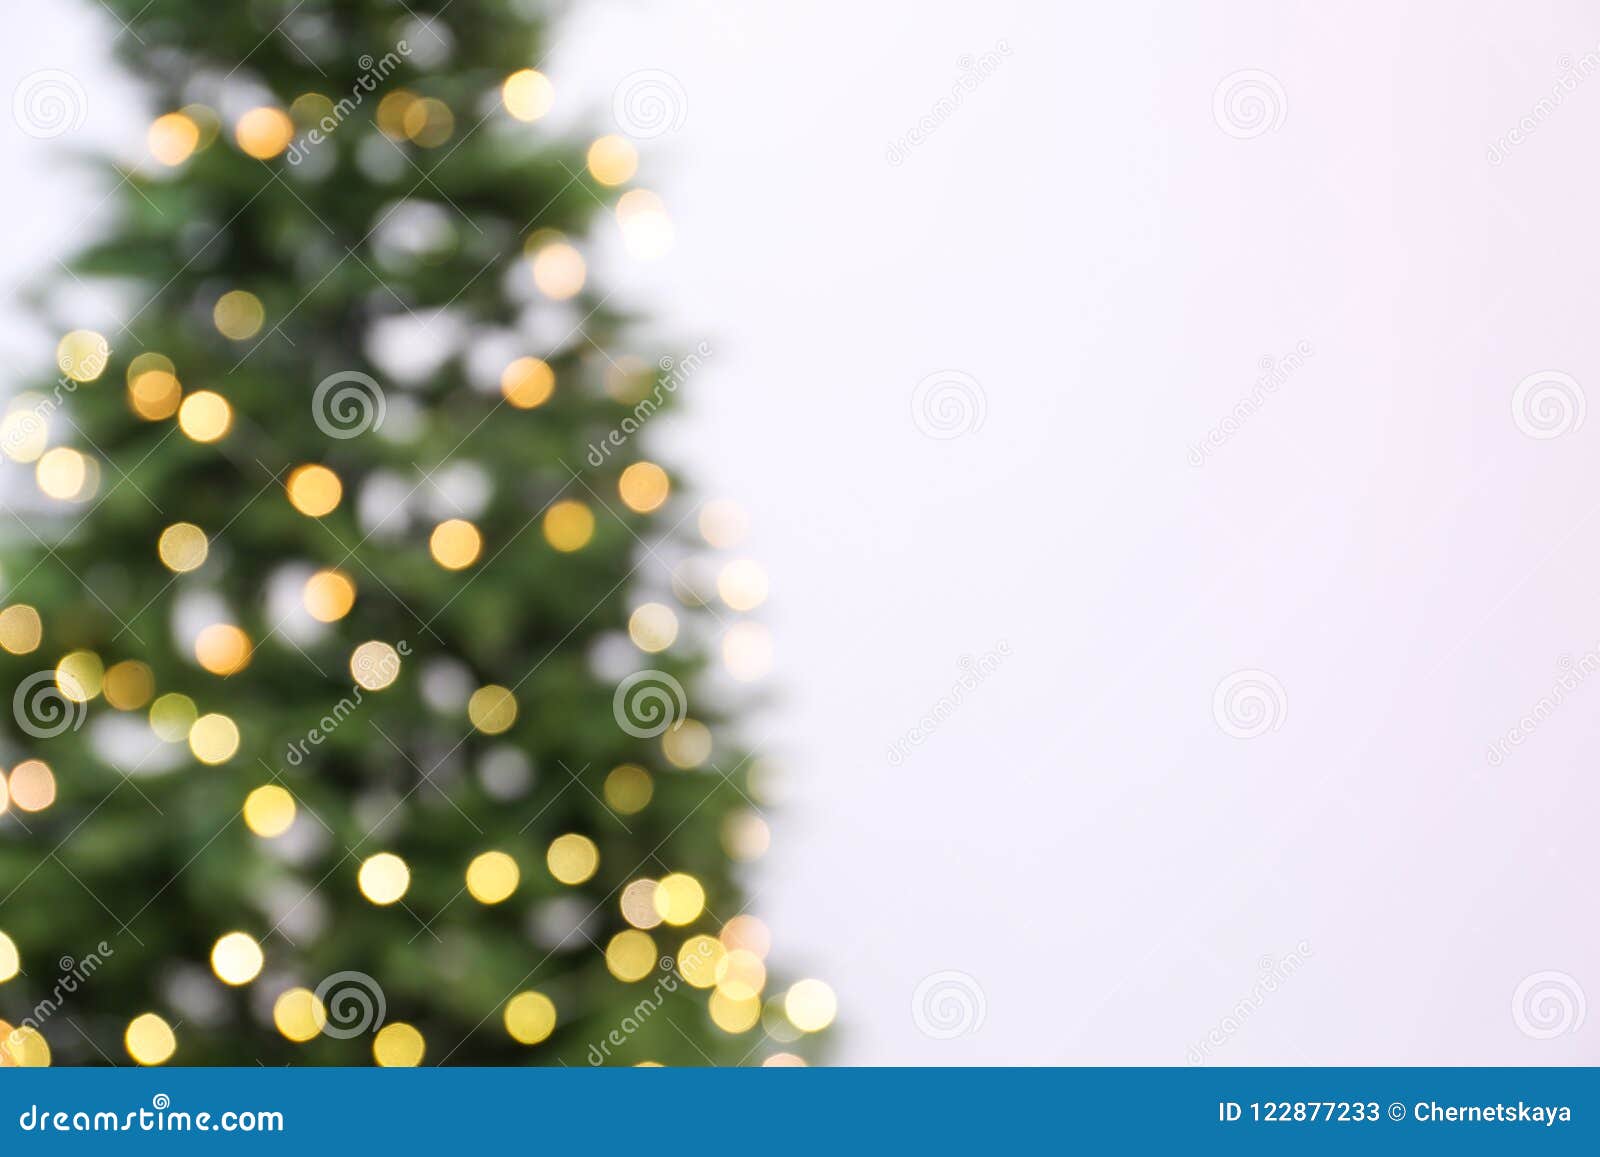 Blurred View of Beautiful Christmas Tree with Fairy Light Stock Image ...